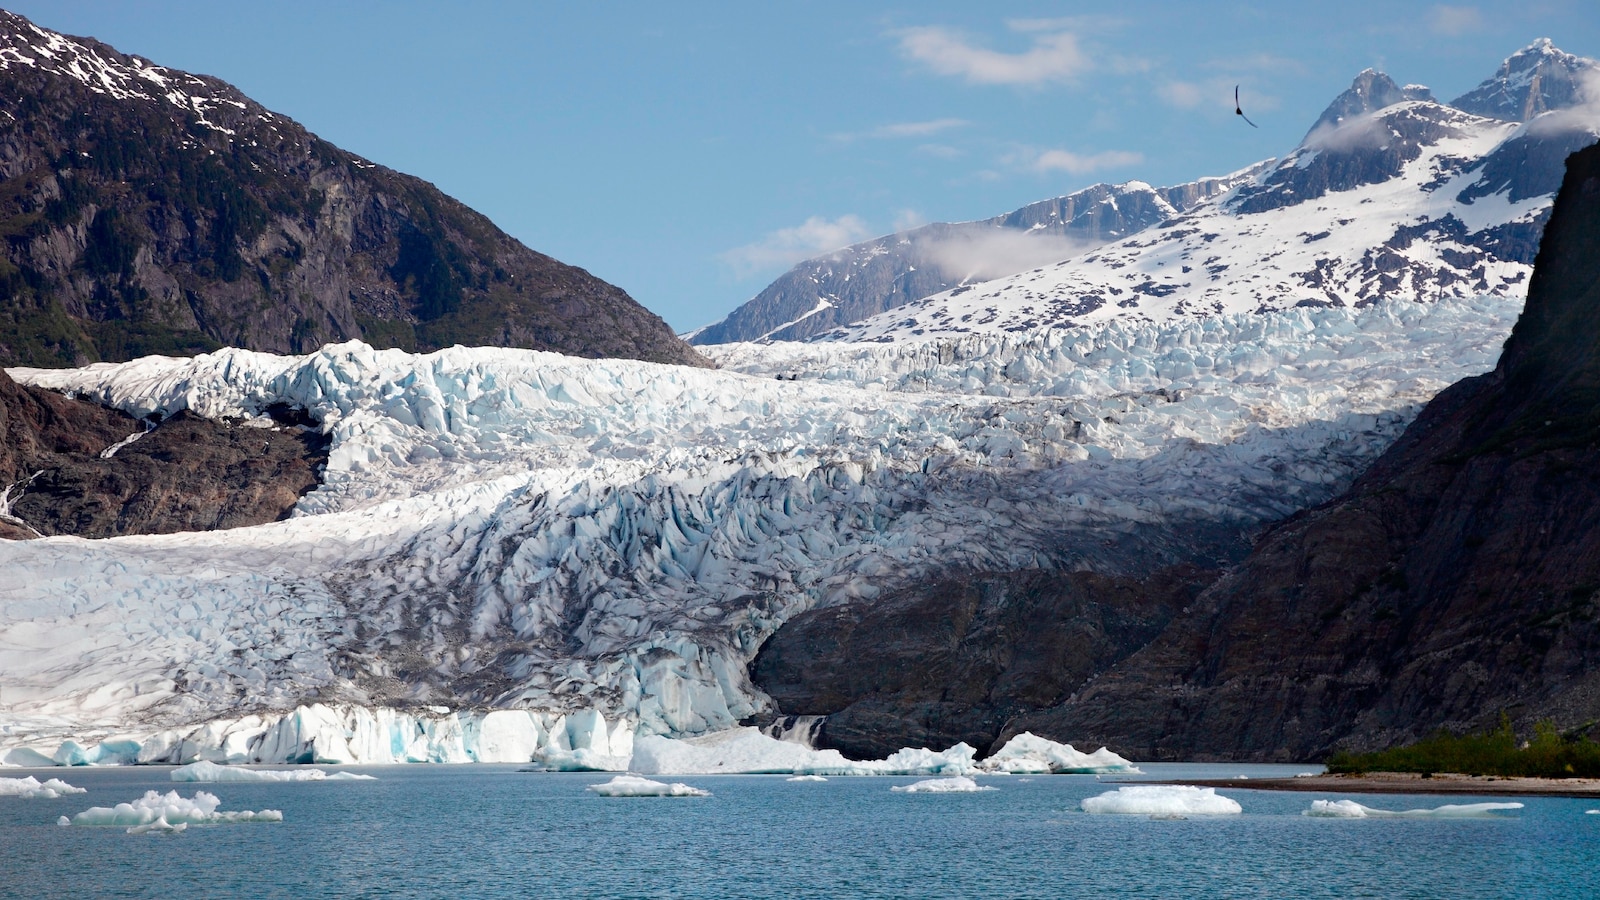 Glaciers on Alaskan ice field melting at ‘incredibly worrying’ pace, study finds [Video]